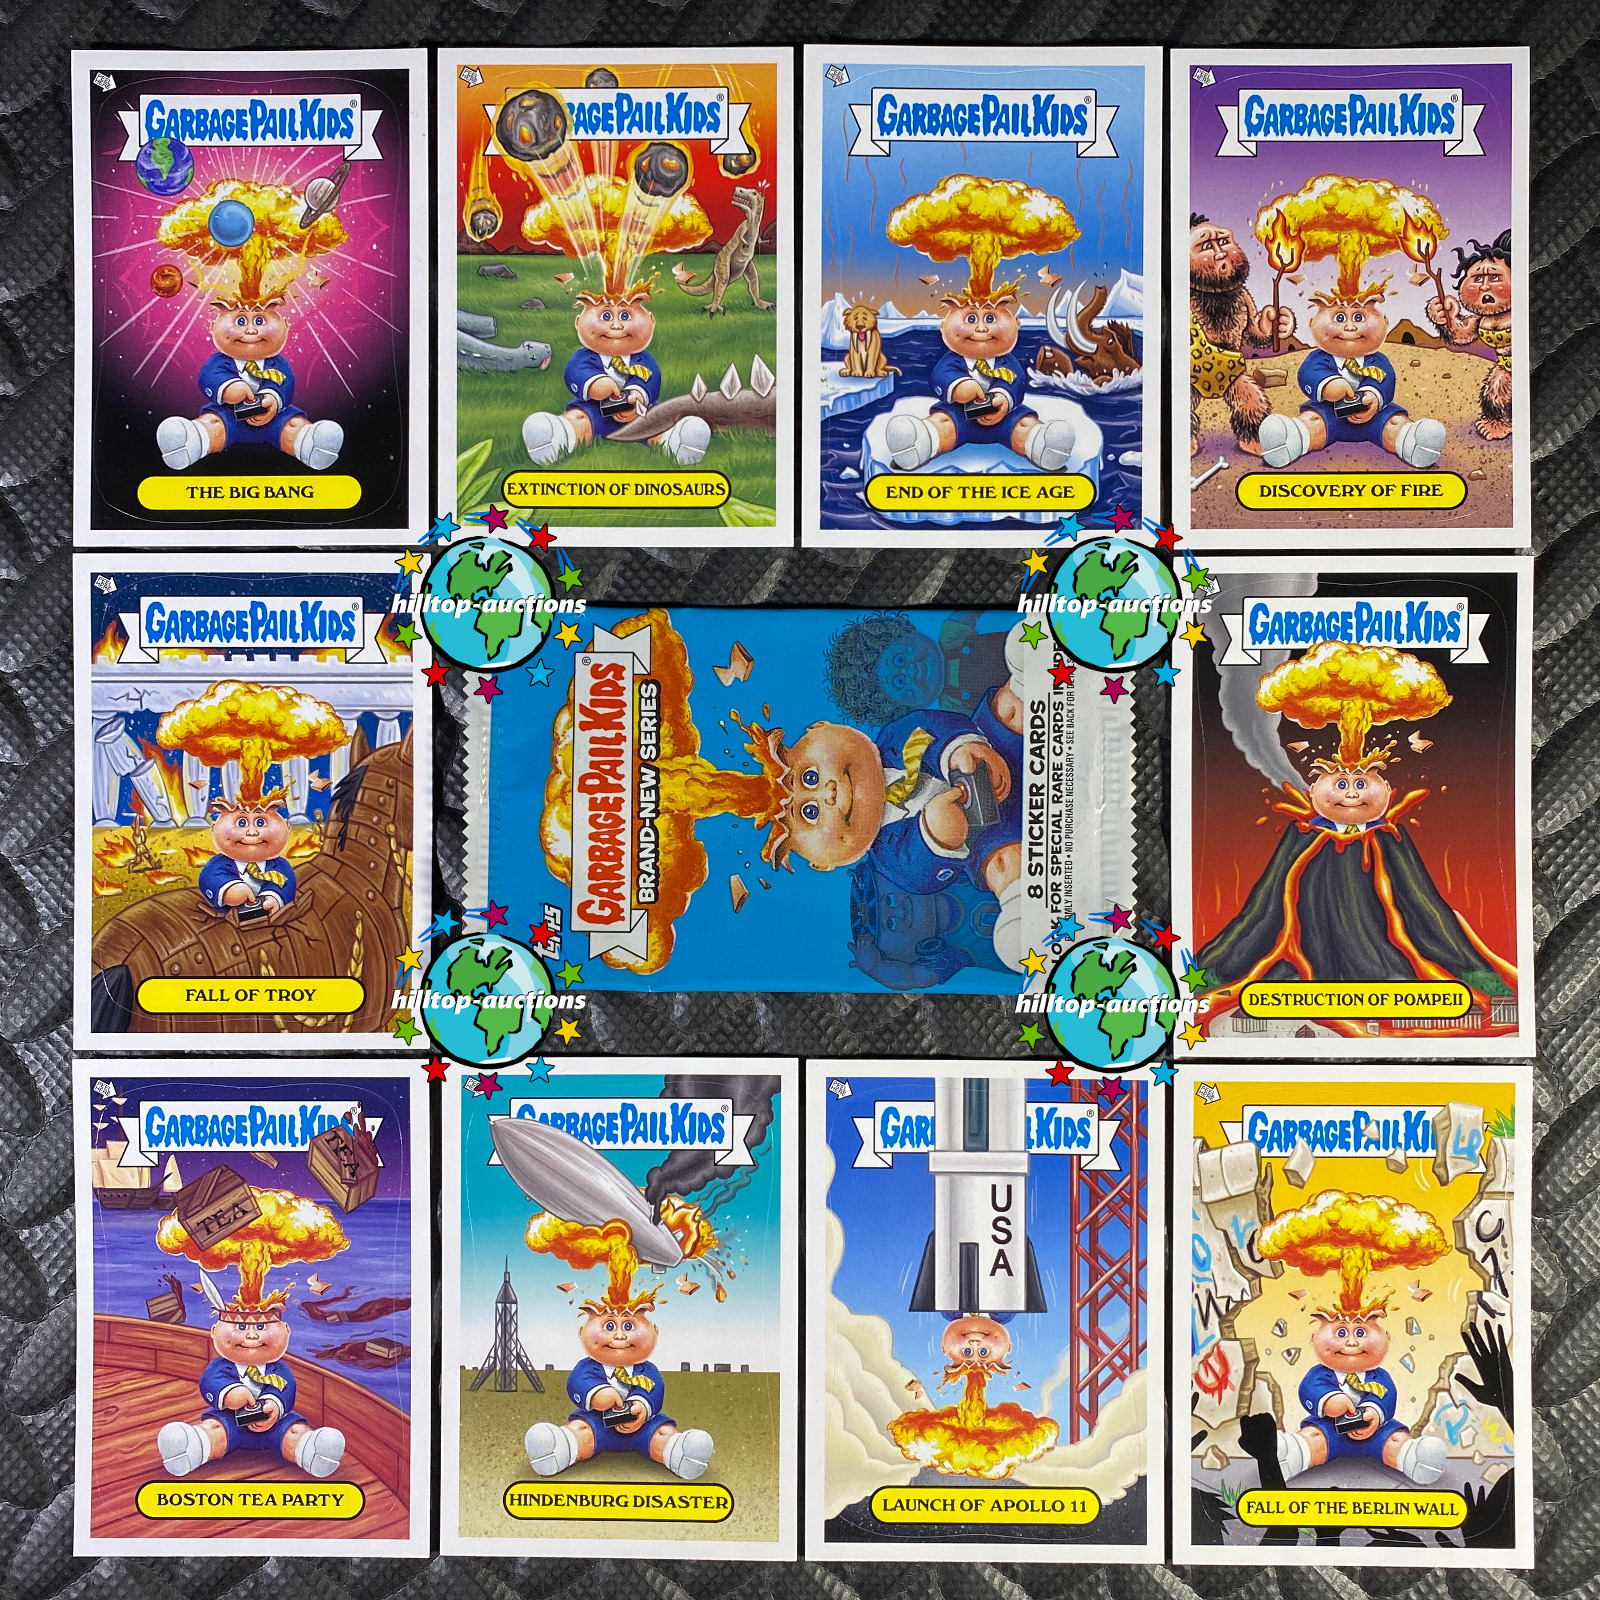 GARBAGE PAIL KIDS BNS1 2012 COMPLETE 10-CARD SET ADAM BOMB THROUGH HISTORY +WRAP